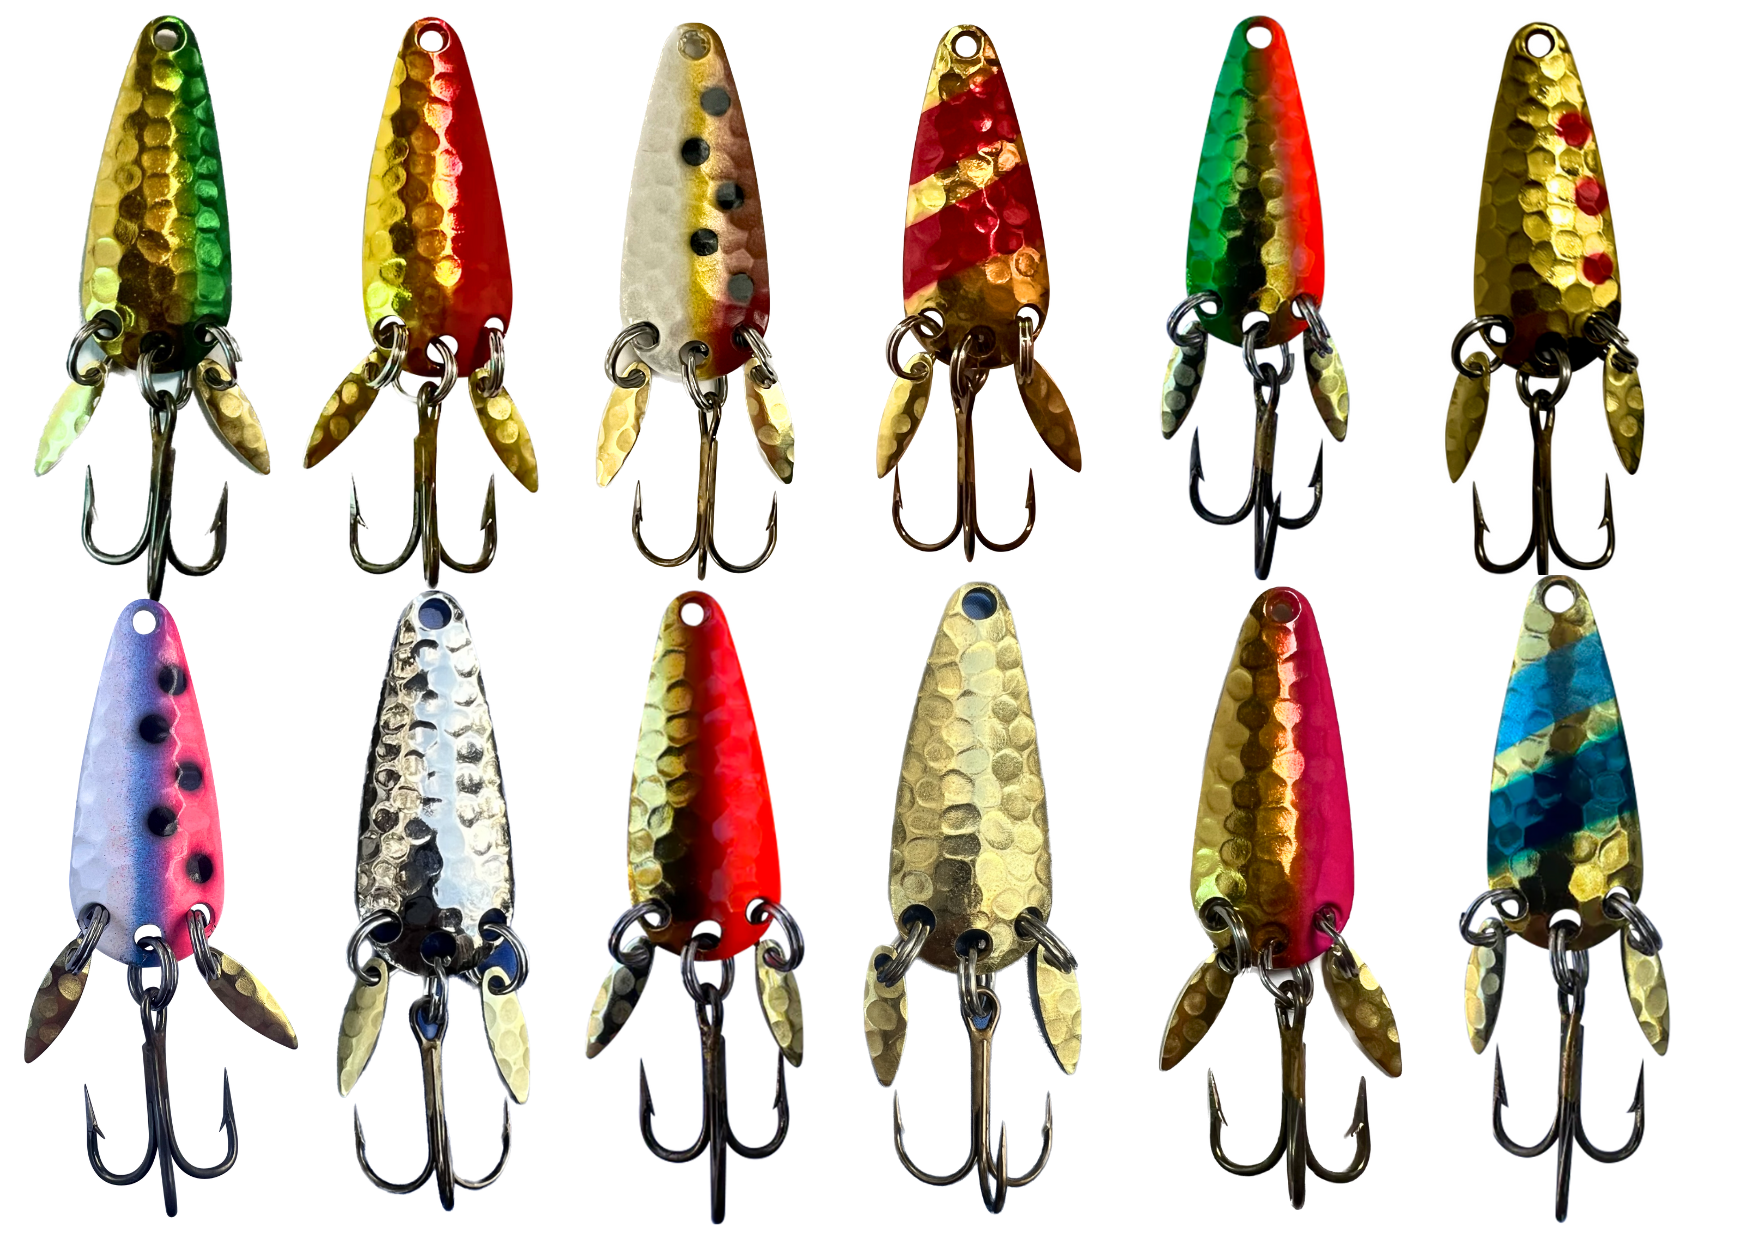 Fishing Lures, Fishing Lures for sale New Zealand